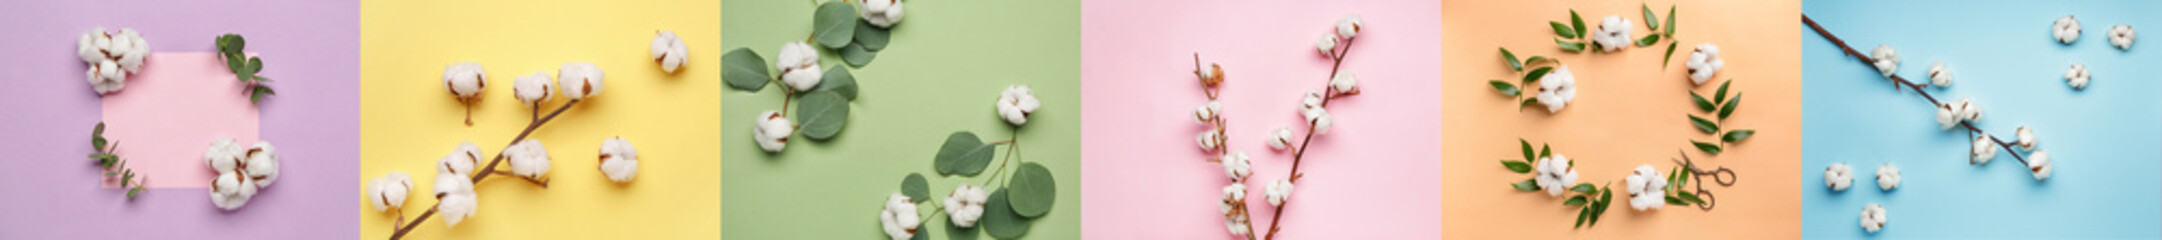 Collage of soft cotton flowers on color background